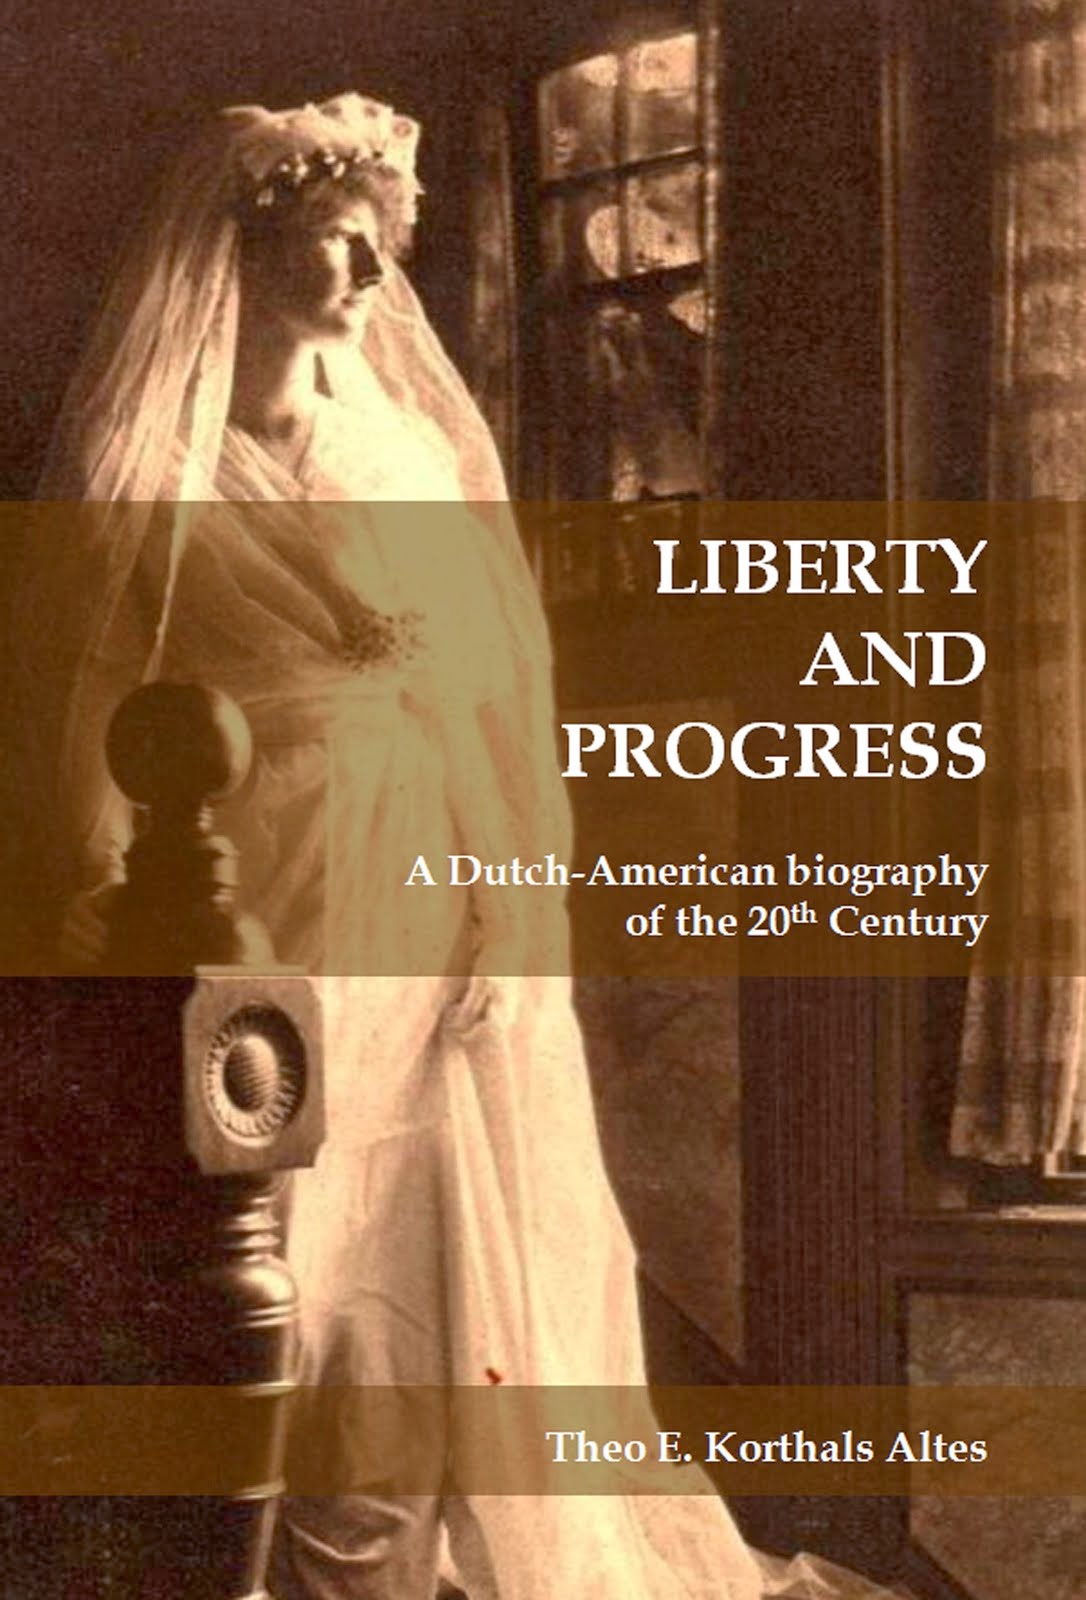 LIBERTY AND PROGRESS  - A Dutch-American biography of the 20th Century